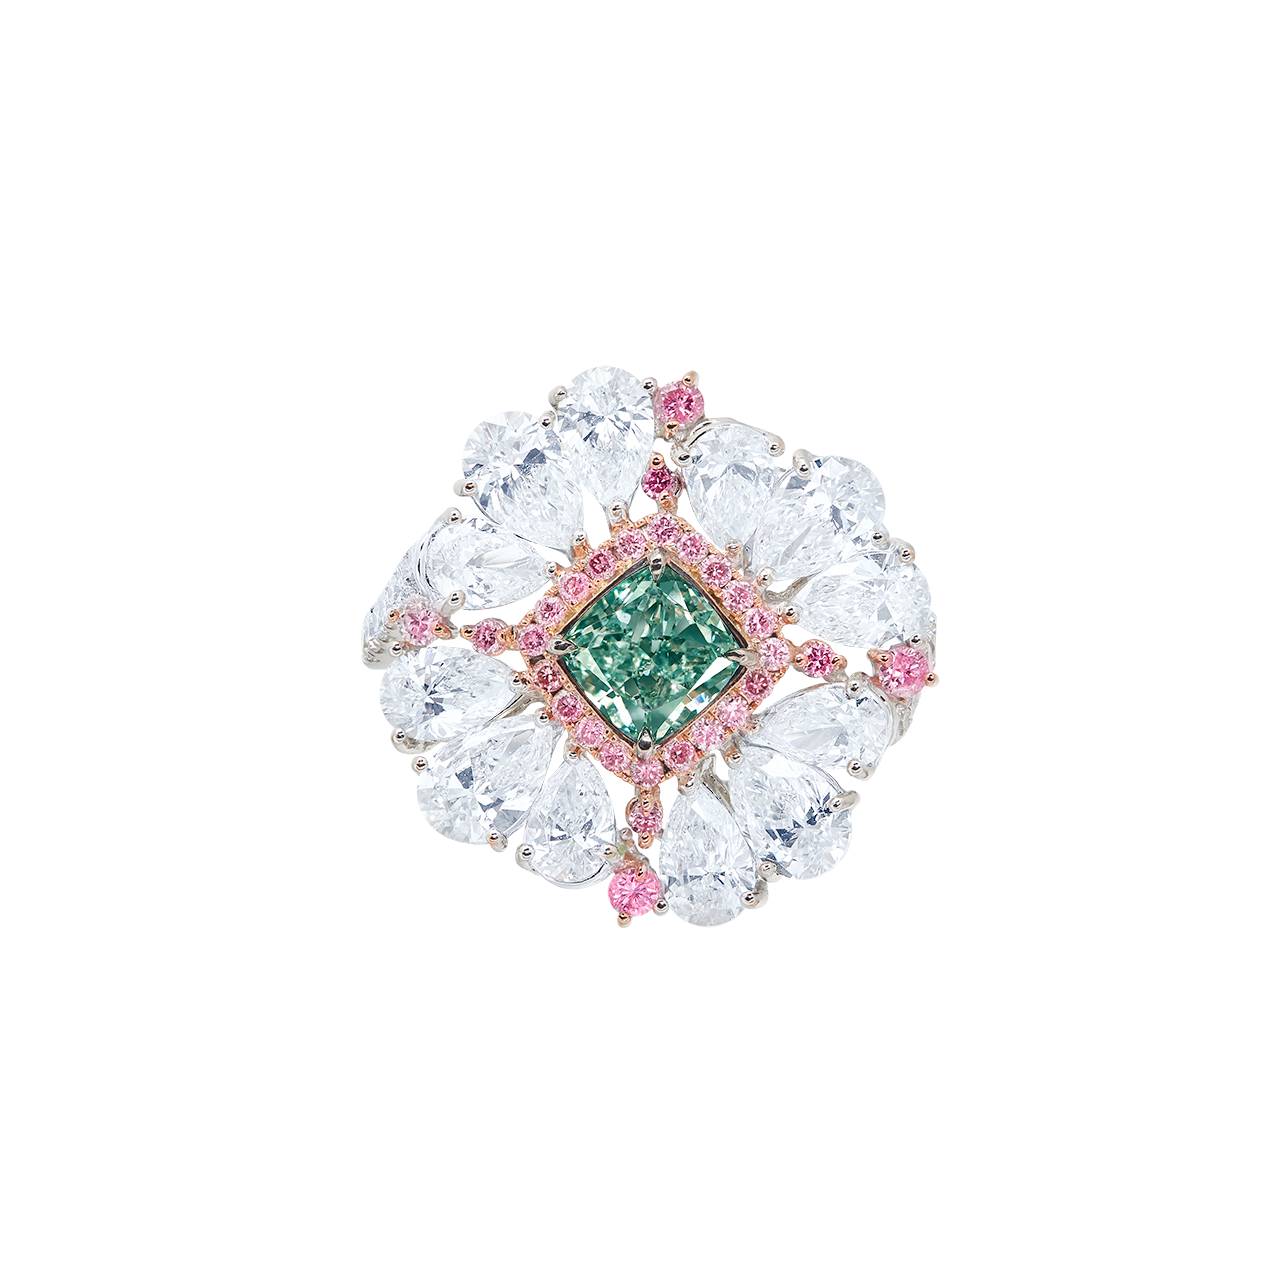 GIA 1.03克拉 藍綠彩鑽戒
Fancy Bluish Green Colored
and Diamond Ring